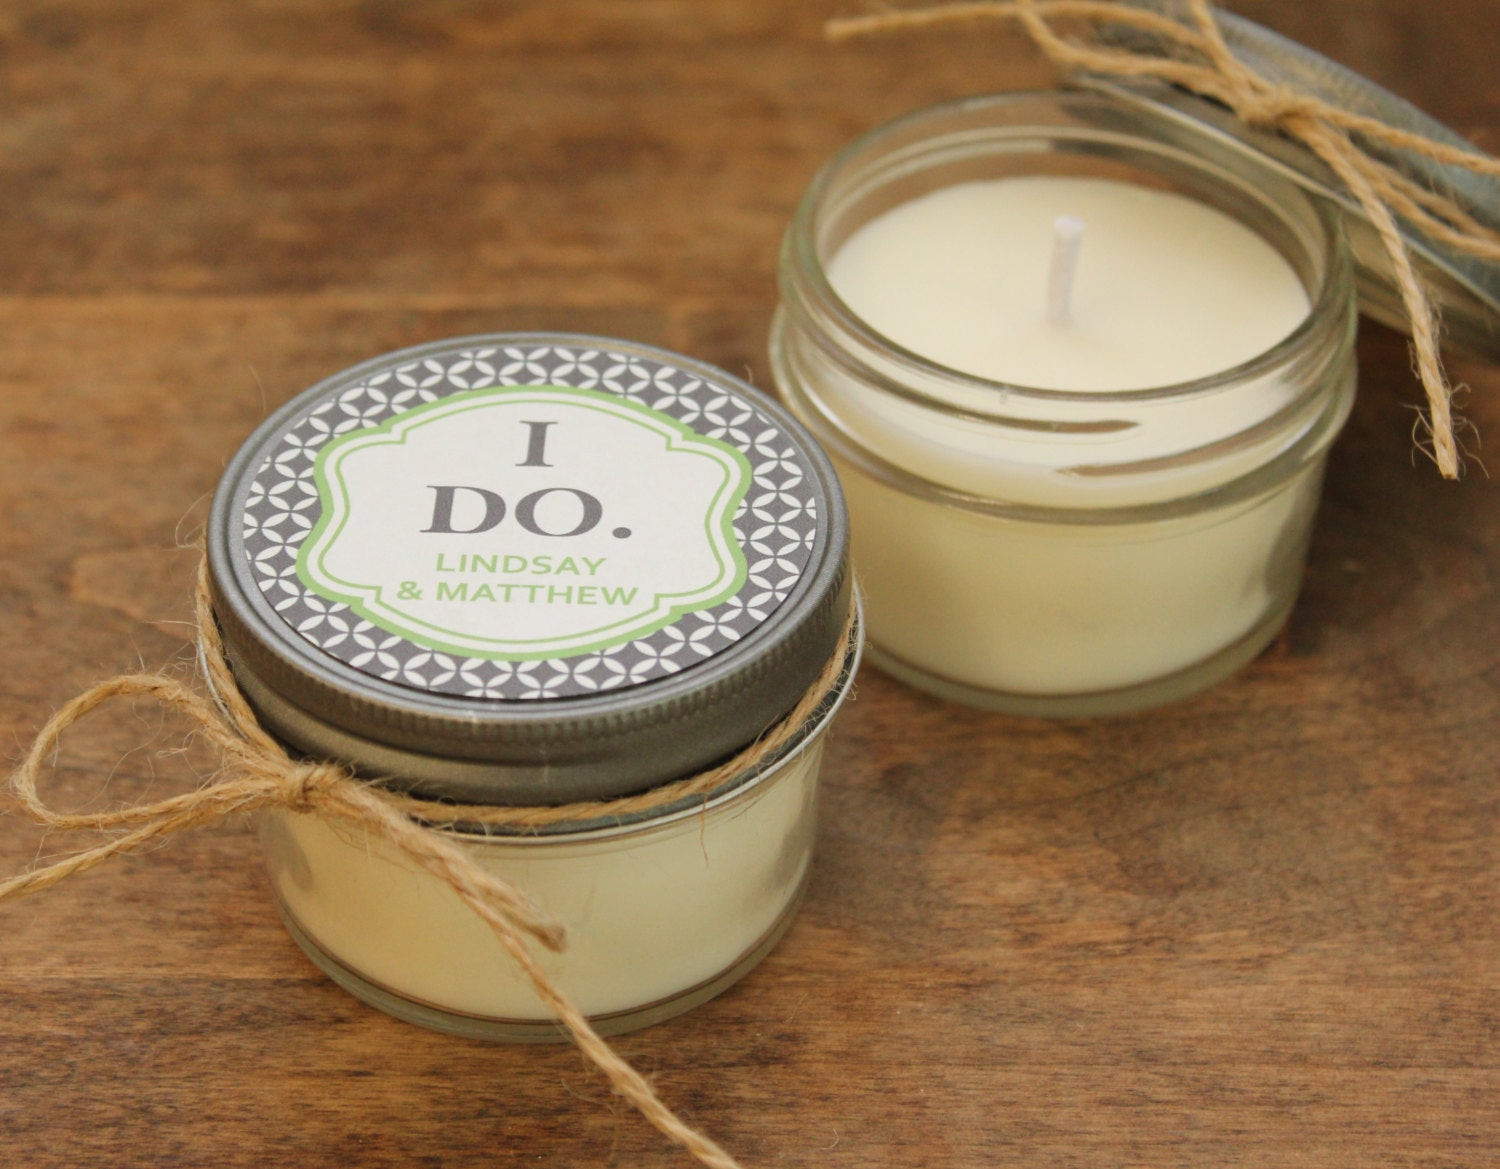 Wedding Favors Candles
 Set of 12 4 oz Soy Candle Wedding Favors I Do Label by